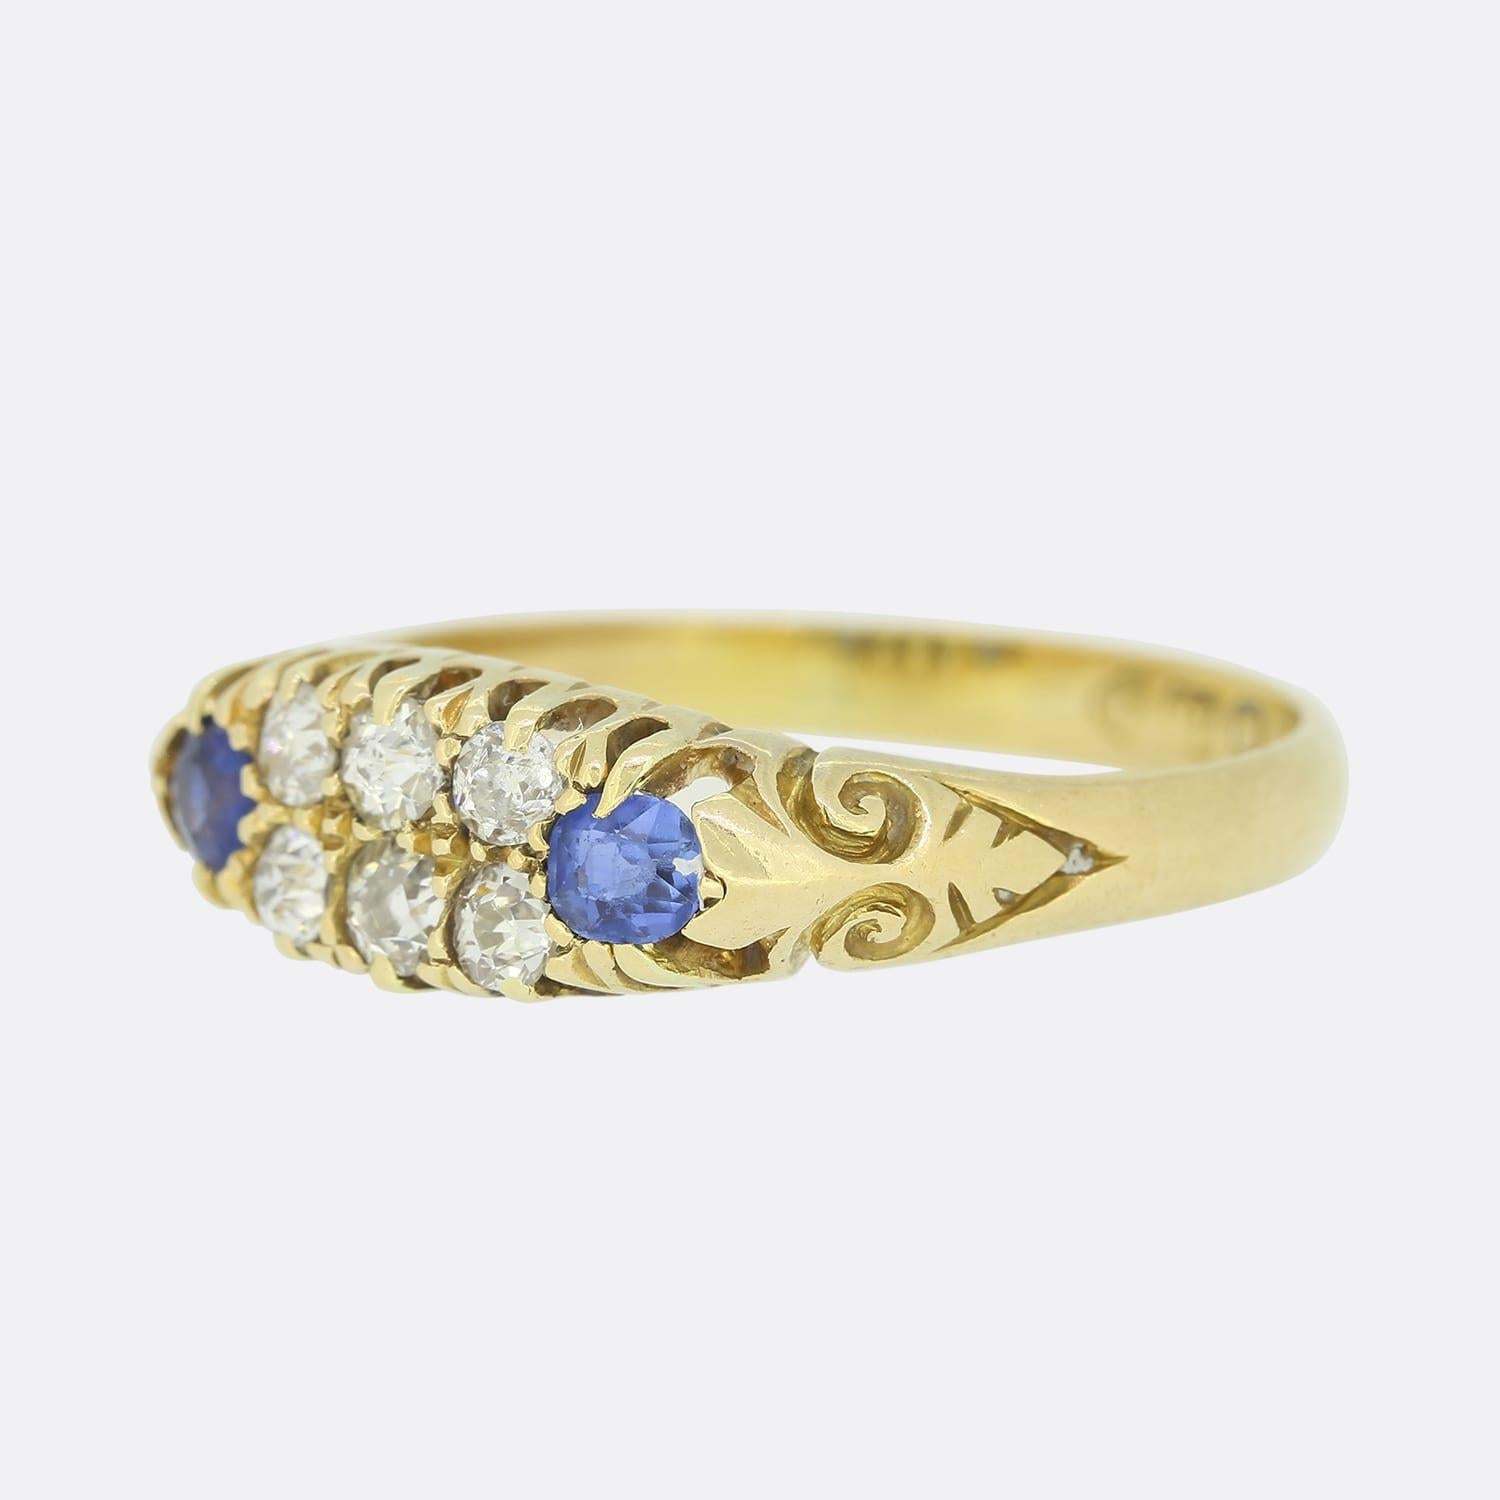 This vintage 18ct yellow gold ring plays host to 6 old cut diamonds and 2 round sapphires. The shank of the ring is beautifully crafted with an elegant pattern.

Condition: Used (Very Good)
Weight: 3.3 grams
Size: P
Sapphire Dimensions:  2